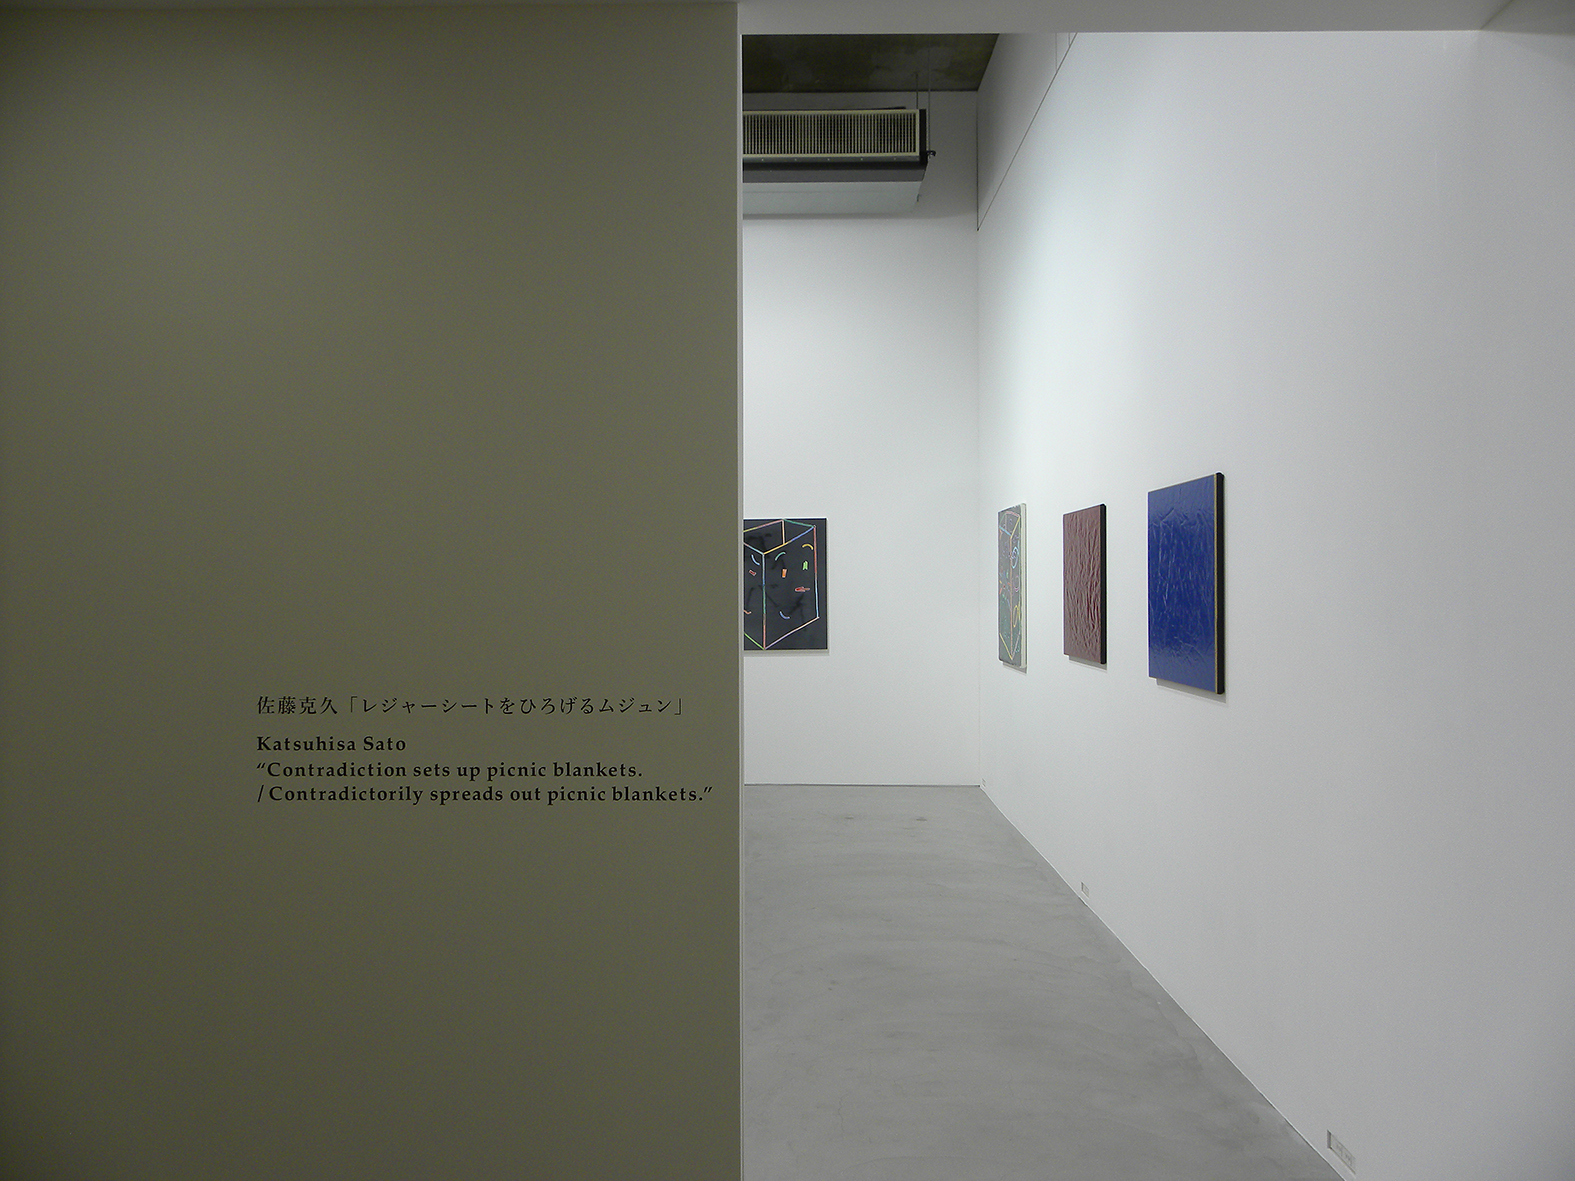 Installation view of the 2019 exhibition : "Contradiction sets up picnic blankets. / Contradictorily spreads out picnic blankets.",  Kodama Gallery | Tennoz, Tokyo, Japan 